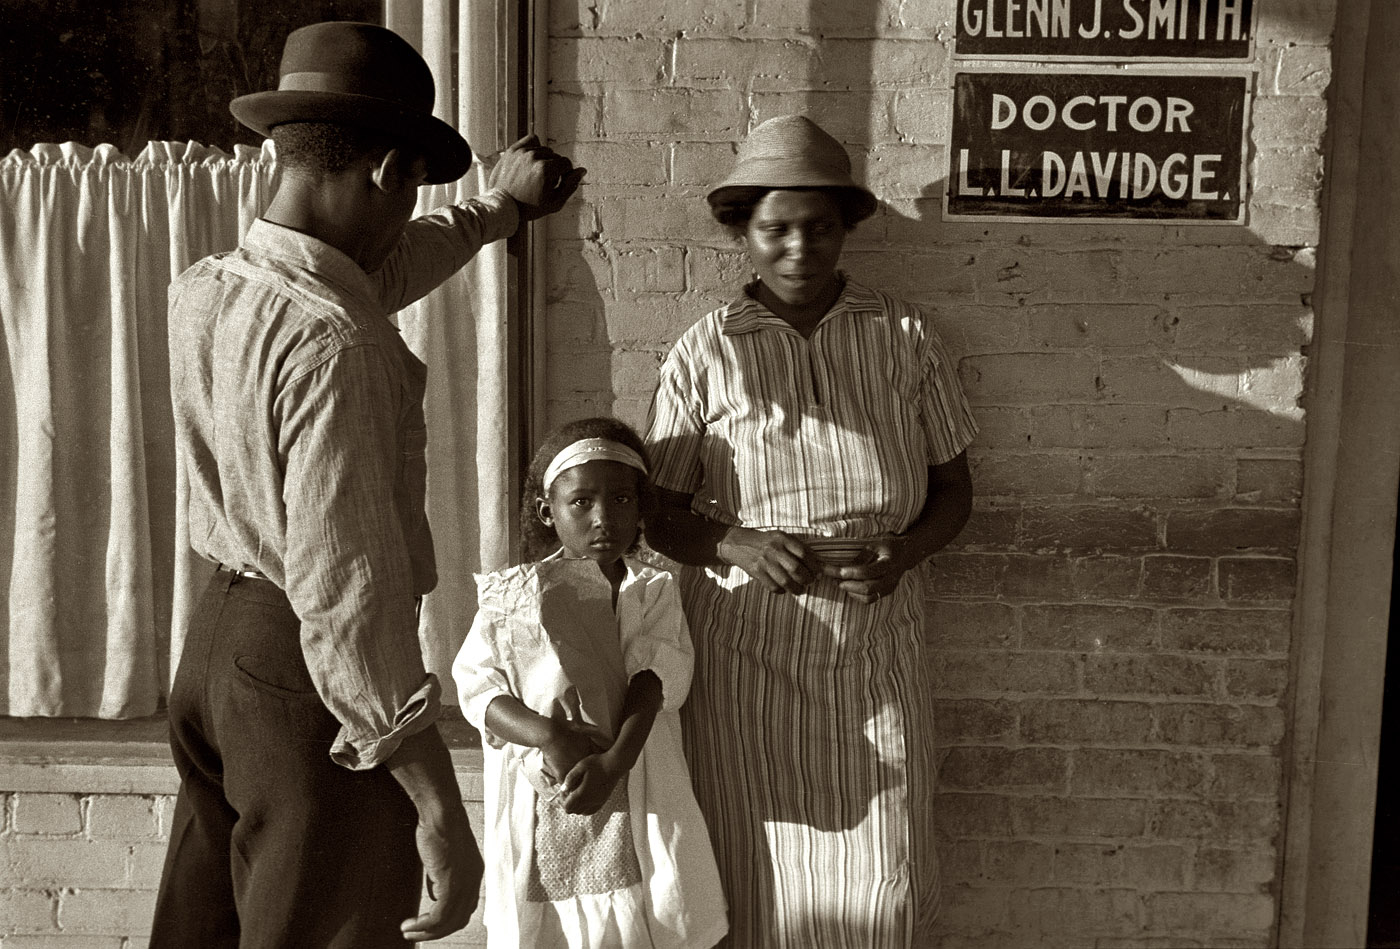 October 1935. "Residents of Amite City, Louisiana." View full size. 35mm nitrate negative by Ben Shahn for the Farm Security Administration.